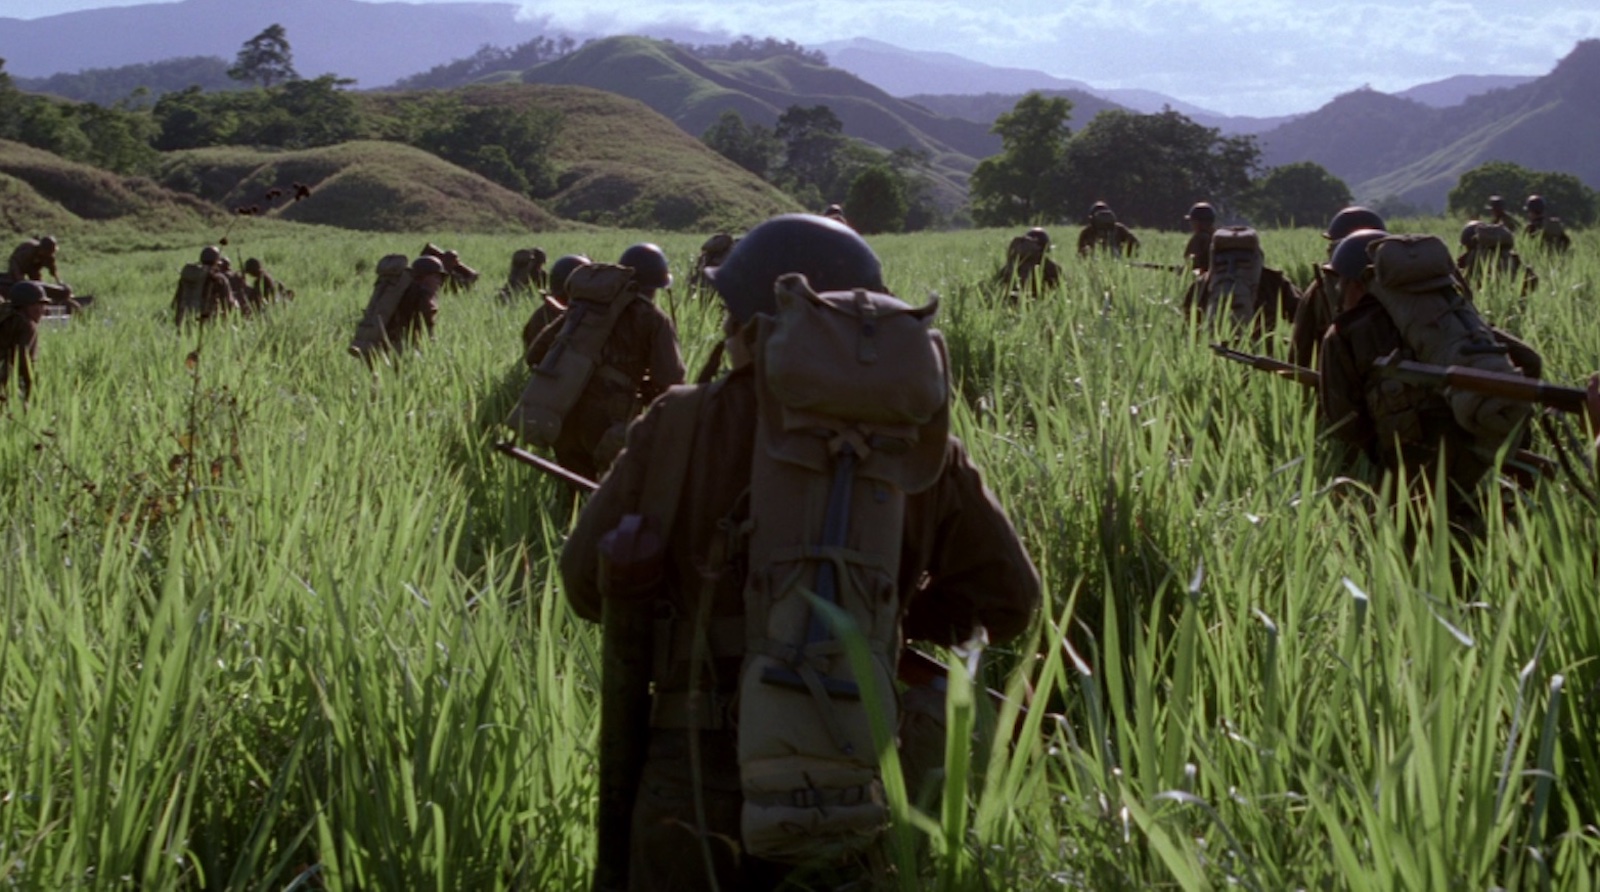 Men in army fatigues and helmets walk through tall grasses in a green landscape